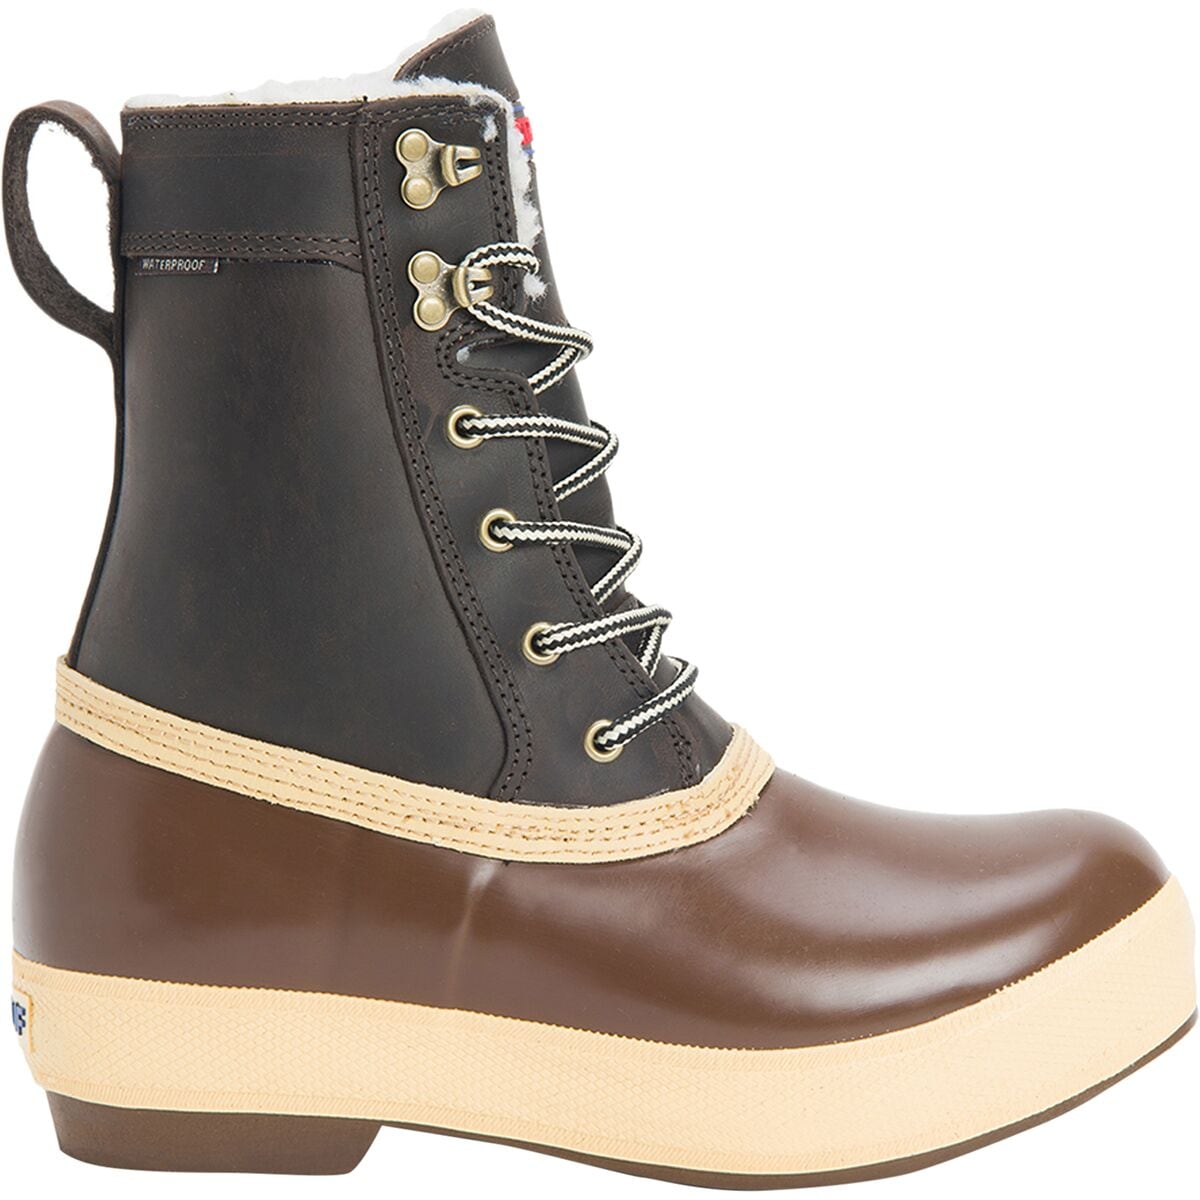 Legacy 6in Insulated Lace Boot - Women